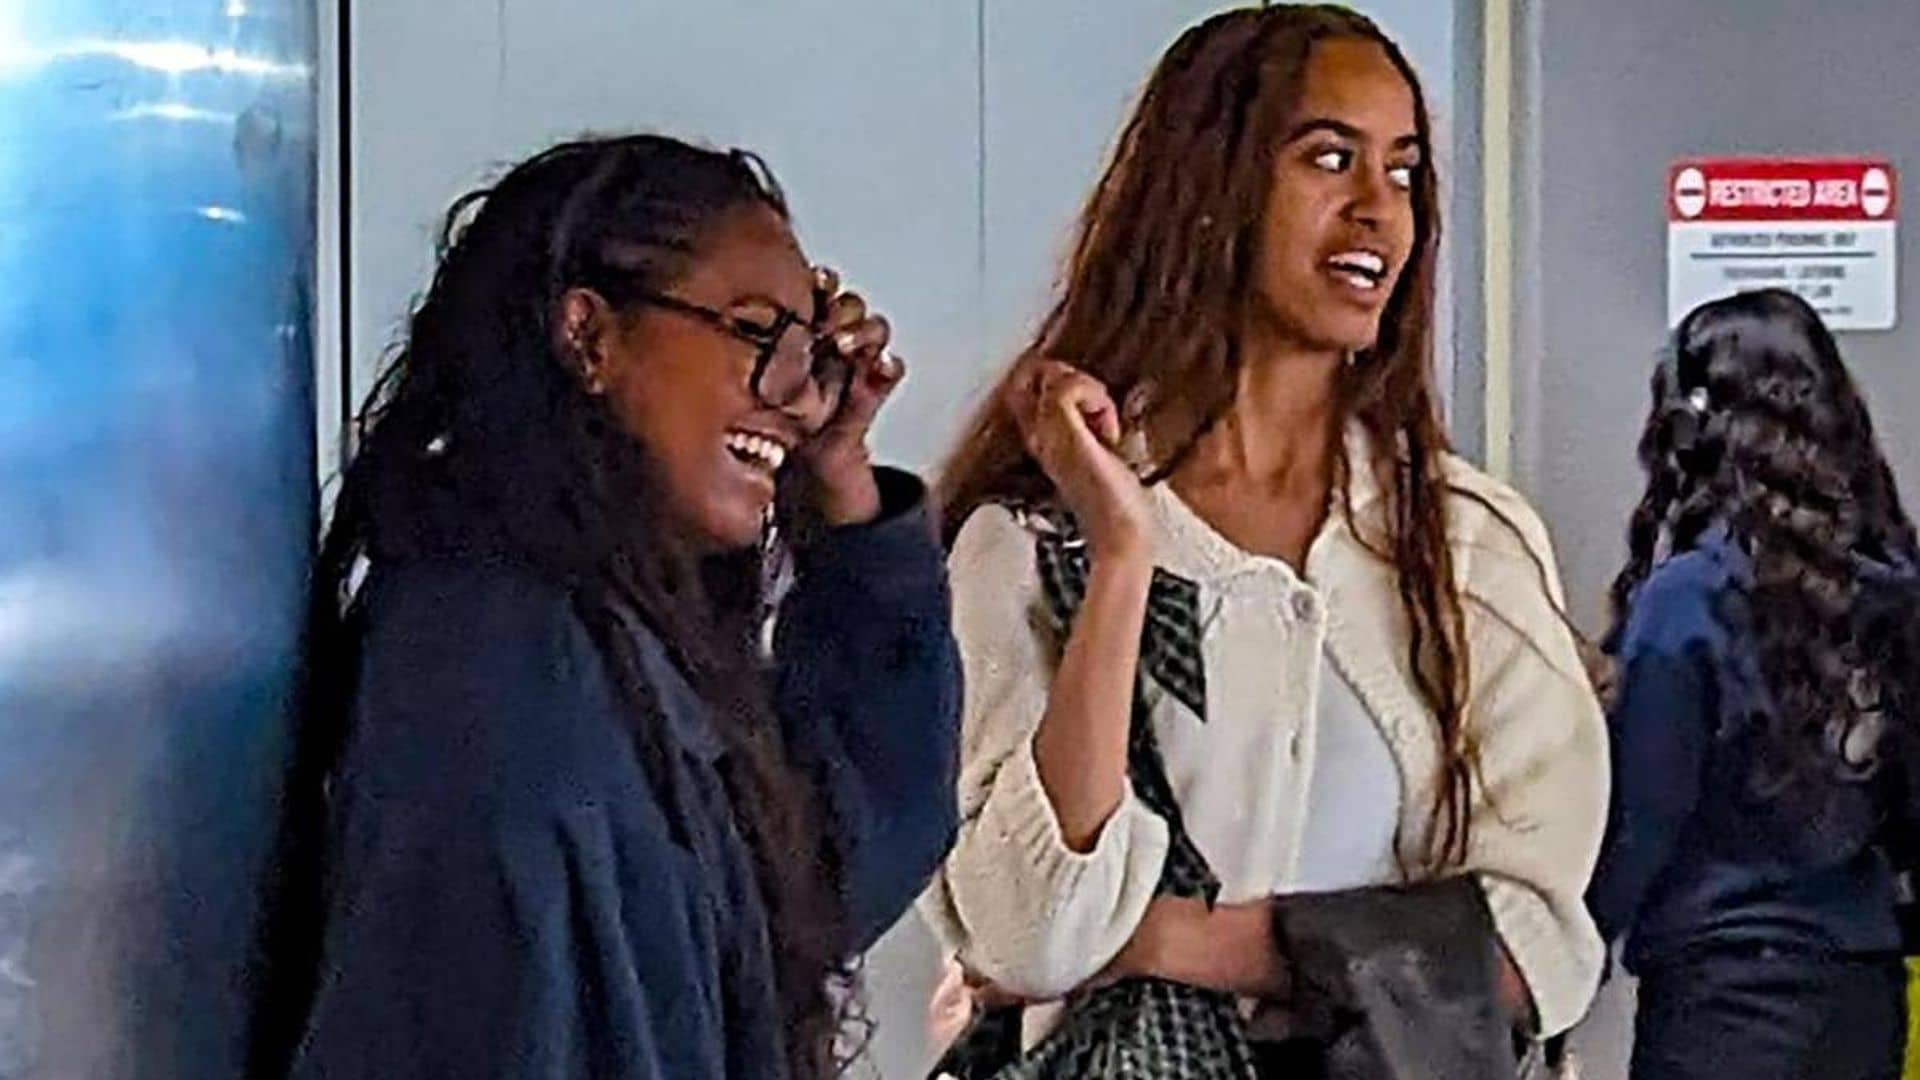 Malia and Sasha Obama laugh together as they wait to board their plane at LAX